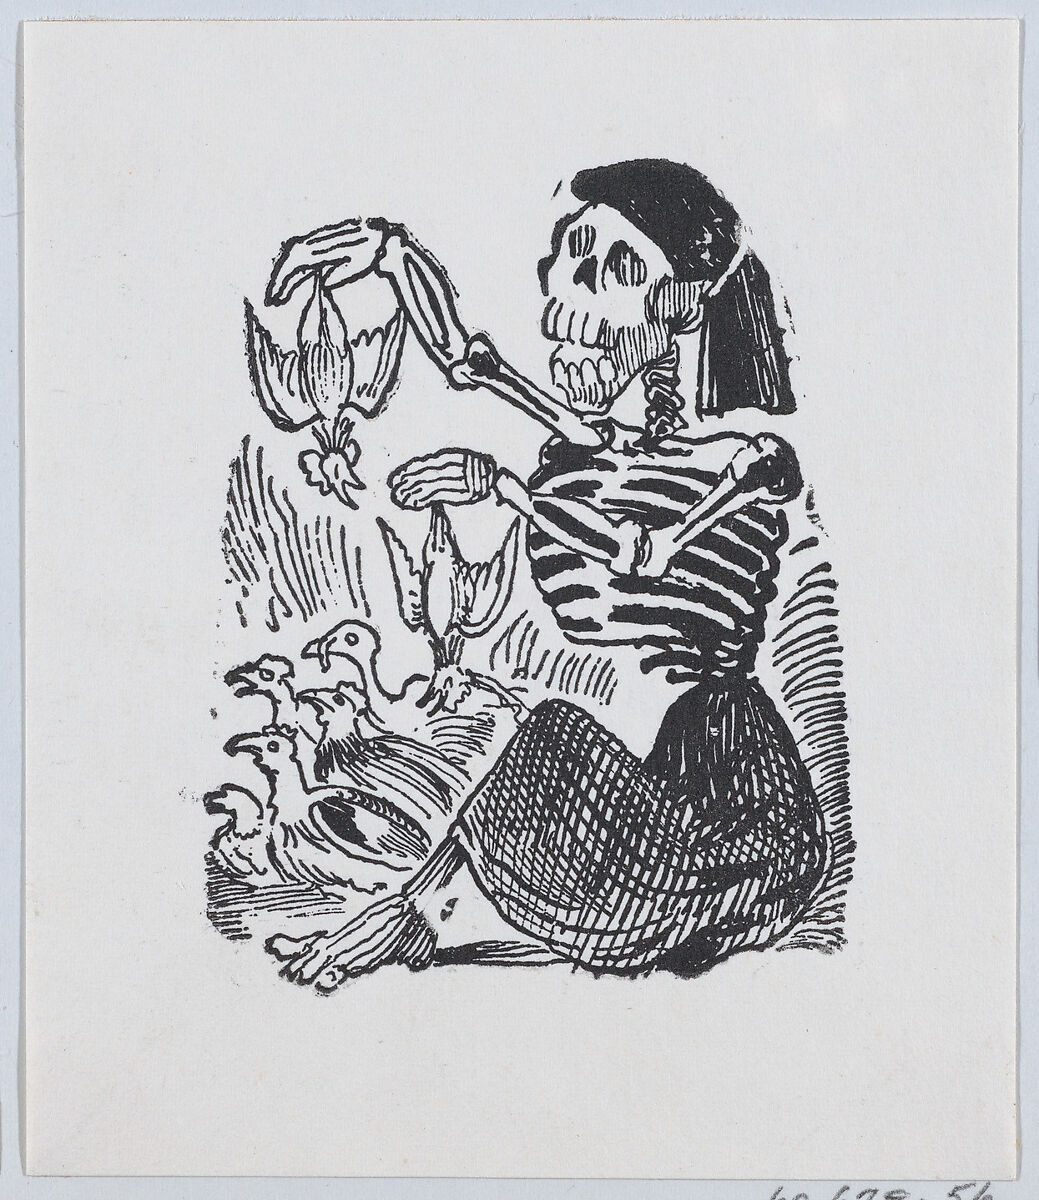 A skeleton selling plucked chickens from a broadside entitled 'Una Calavera Chusca', José Guadalupe Posada (Mexican, Aguascalientes 1852–1913 Mexico City), Zincograph 